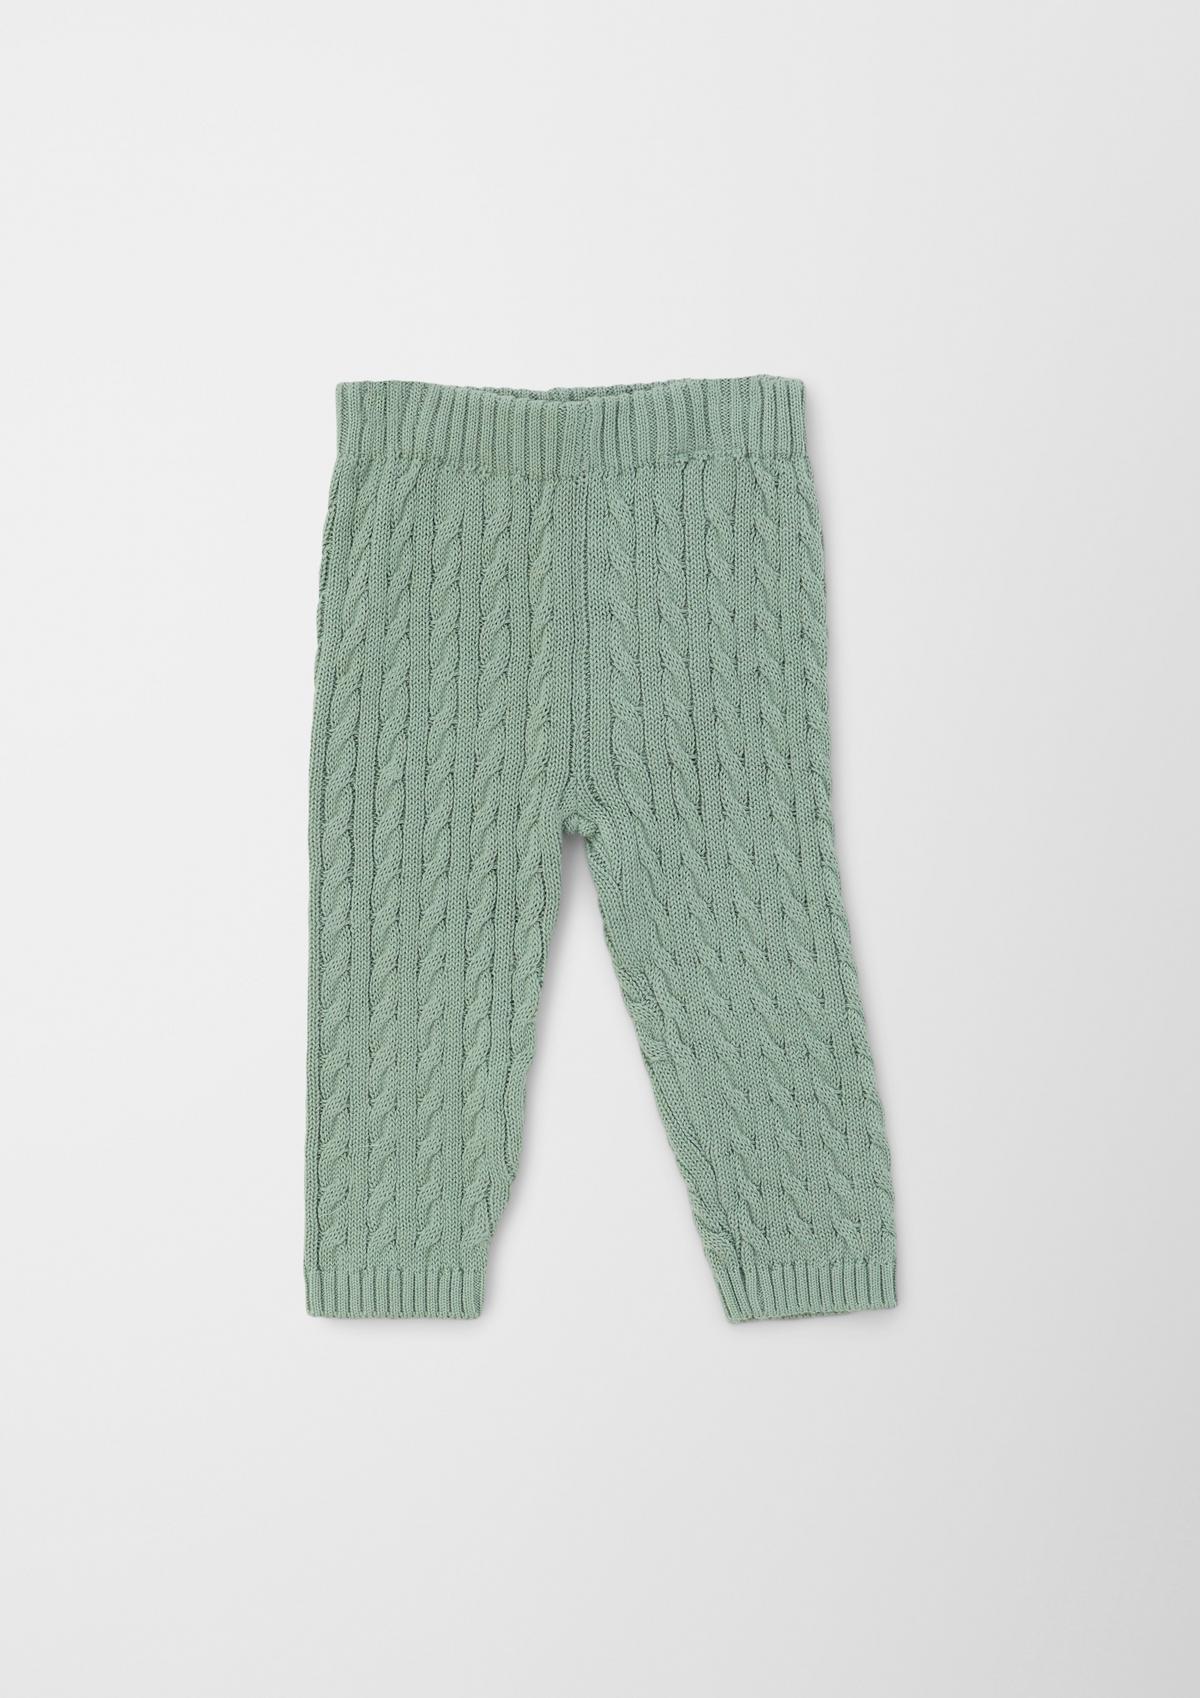 s.Oliver Leggings with a knit pattern